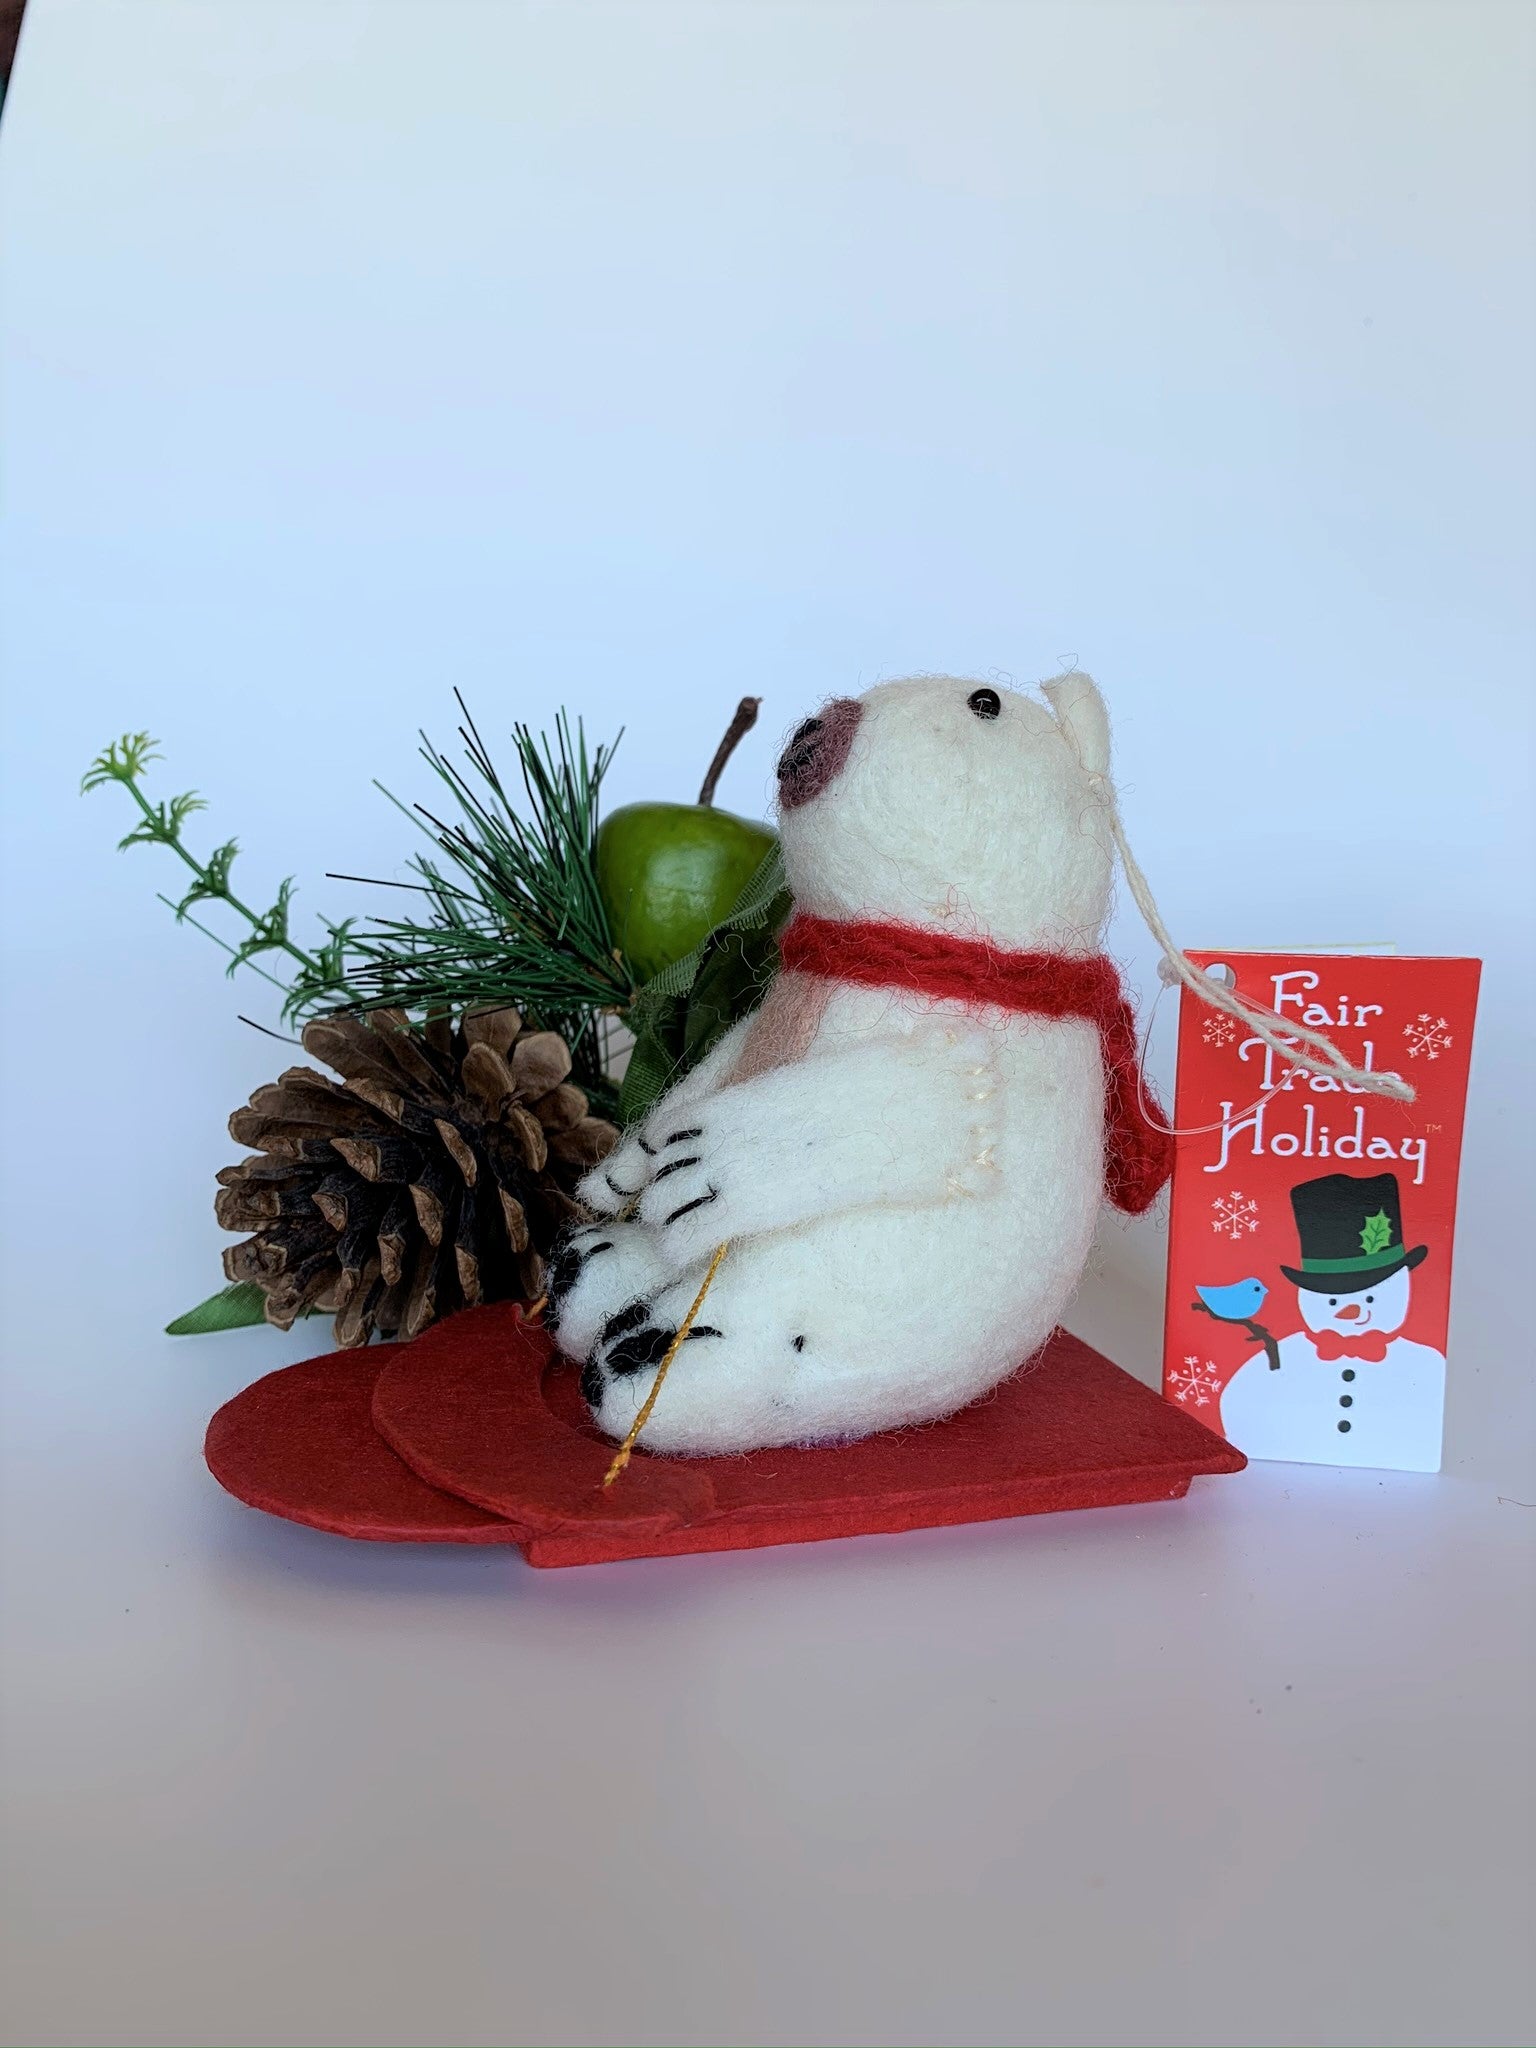 This is a side view of the sledding polar bear Christmas Ornament that is handcrafted (fair trade). The polar bear is made of 100% natural wool and the sled is handmade with paper that is hardened and feels somewhat like very thin wood and it is red. The bear is off-white with a tan belly, brownish-gray muzzle, black accents (paws, nose, etc.) and is wearing a red winter scarf. It is approximately 4.75"x3.5"x2.5" It comes with a fair trade holiday "to/from" tag to use if giving this as a gift.